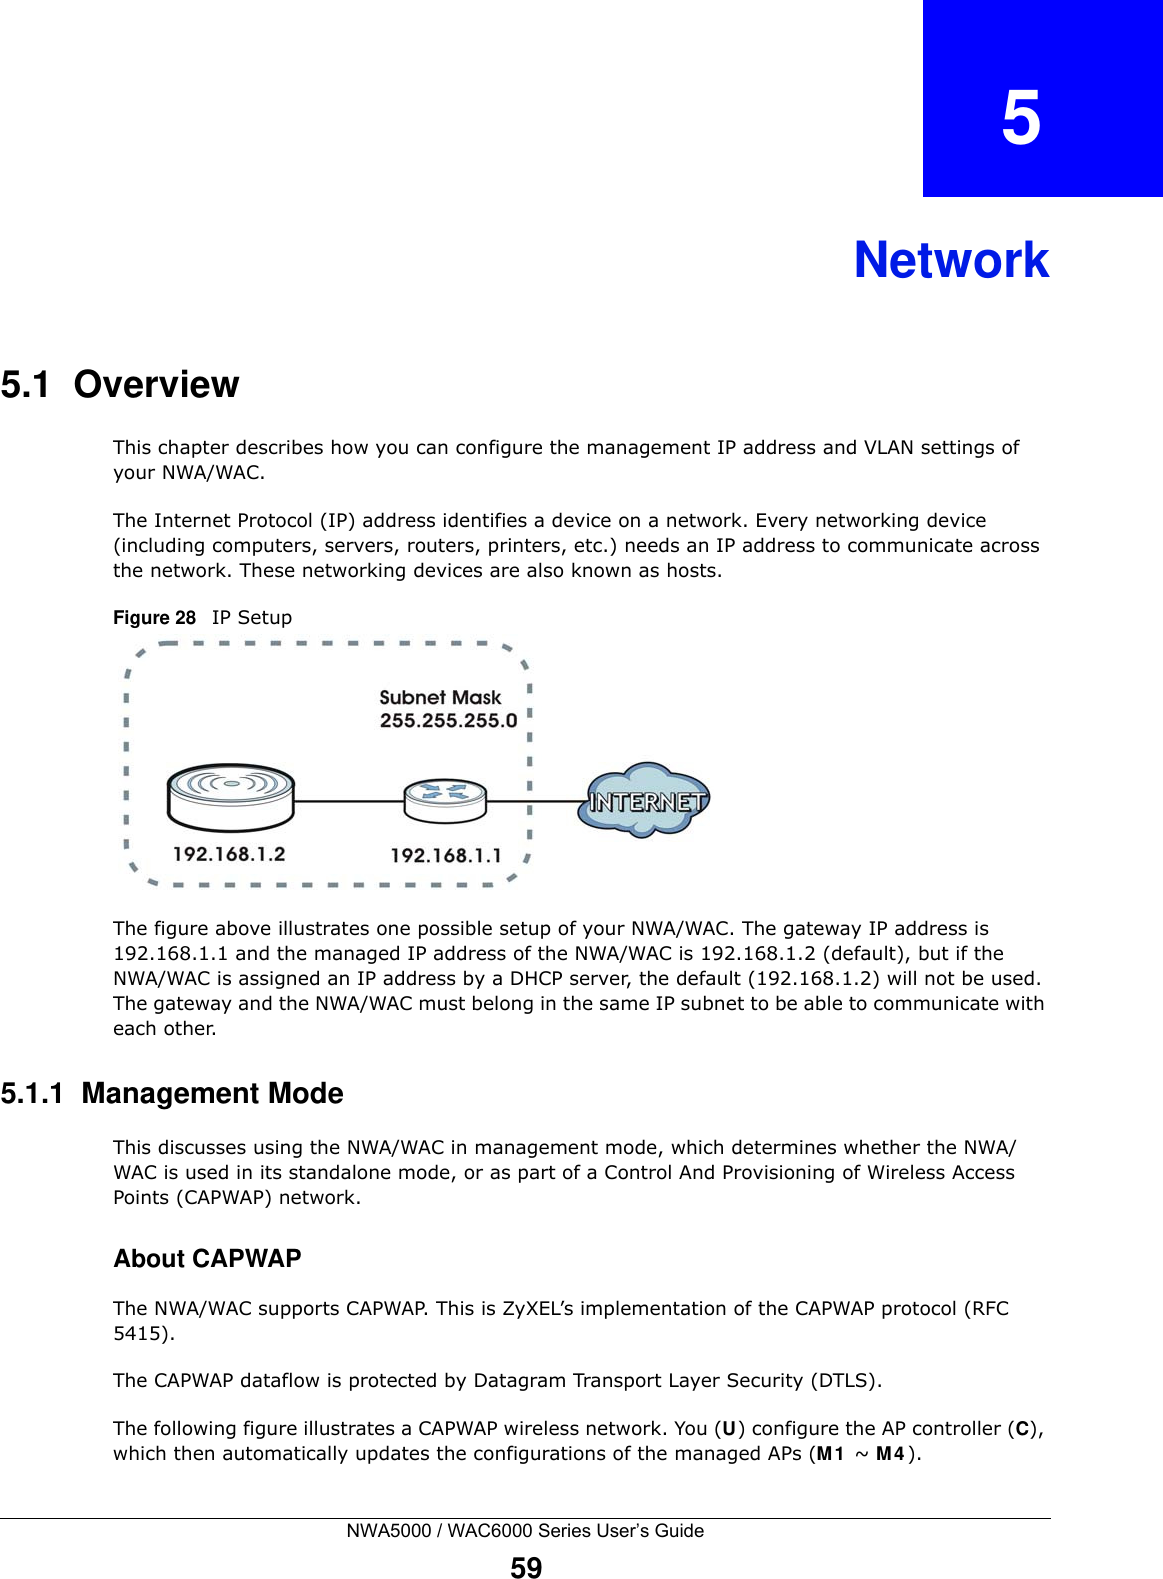 NWA5000 / WAC6000 Series User’s Guide59CHAPTER   5Network5.1  OverviewThis chapter describes how you can configure the management IP address and VLAN settings of your NWA/WAC.The Internet Protocol (IP) address identifies a device on a network. Every networking device (including computers, servers, routers, printers, etc.) needs an IP address to communicate across the network. These networking devices are also known as hosts.Figure 28   IP SetupThe figure above illustrates one possible setup of your NWA/WAC. The gateway IP address is 192.168.1.1 and the managed IP address of the NWA/WAC is 192.168.1.2 (default), but if the NWA/WAC is assigned an IP address by a DHCP server, the default (192.168.1.2) will not be used. The gateway and the NWA/WAC must belong in the same IP subnet to be able to communicate with each other.5.1.1  Management ModeThis discusses using the NWA/WAC in management mode, which determines whether the NWA/WAC is used in its standalone mode, or as part of a Control And Provisioning of Wireless Access Points (CAPWAP) network. About CAPWAPThe NWA/WAC supports CAPWAP. This is ZyXEL’s implementation of the CAPWAP protocol (RFC 5415). The CAPWAP dataflow is protected by Datagram Transport Layer Security (DTLS).The following figure illustrates a CAPWAP wireless network. You (U) configure the AP controller (C), which then automatically updates the configurations of the managed APs (M1  ~ M 4 ). 